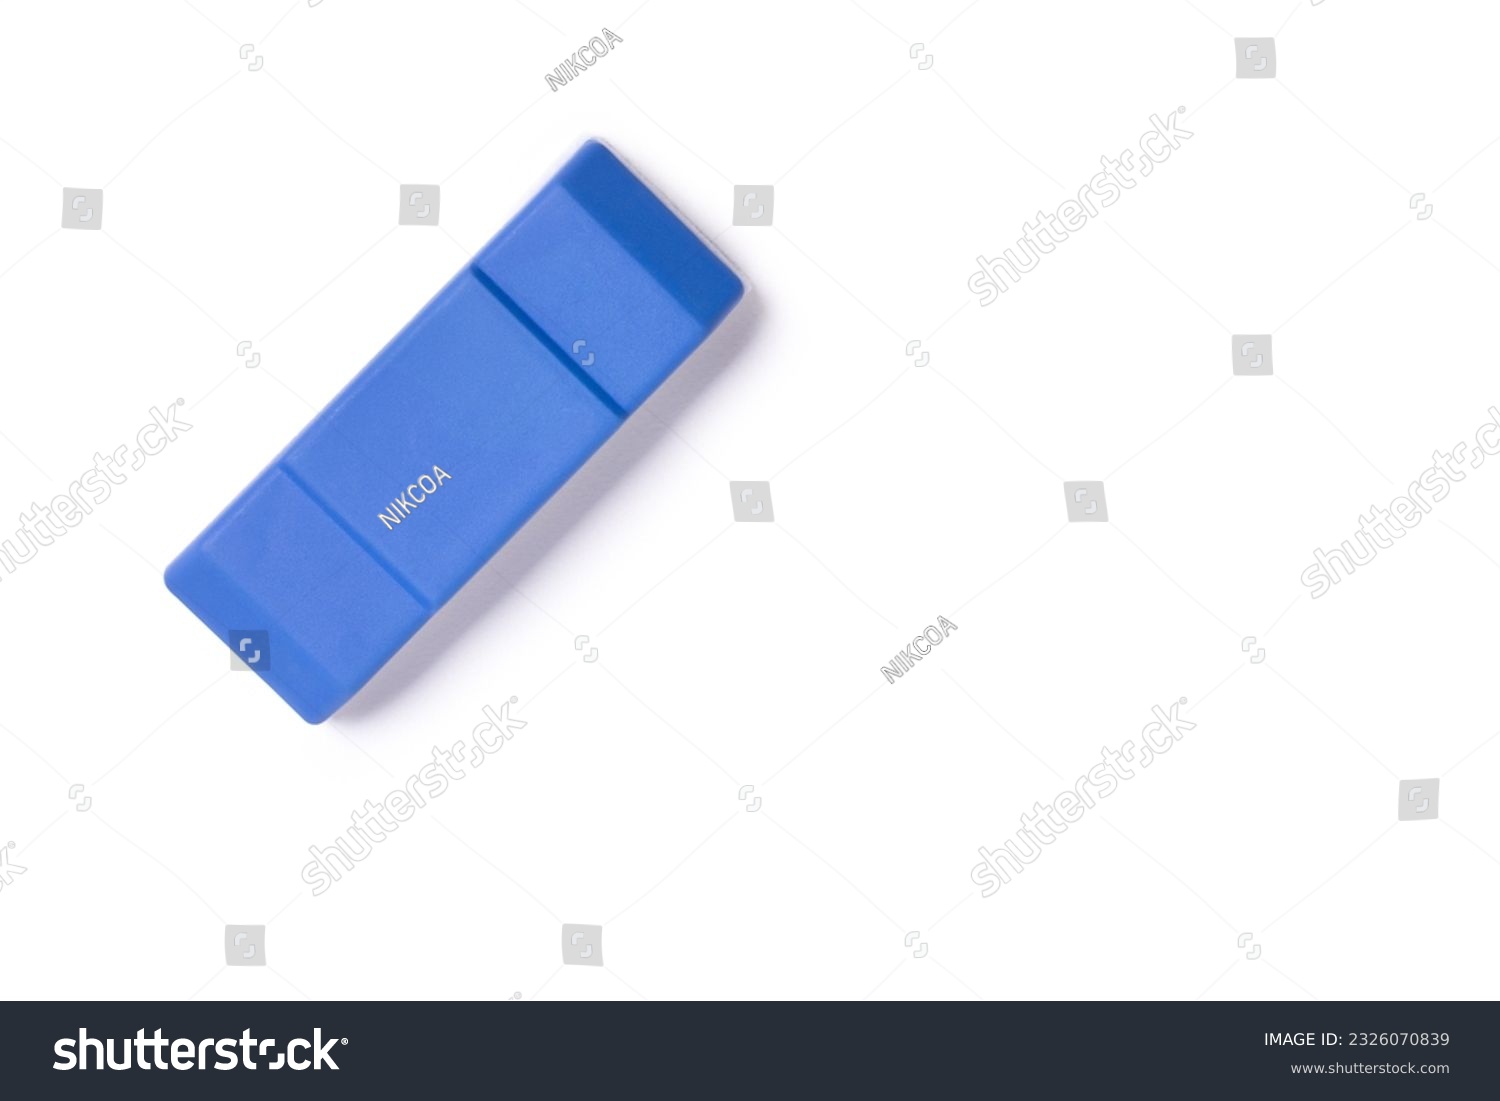 Brush eraser isolated on white background with clipping path. top view, flat lay. #2326070839